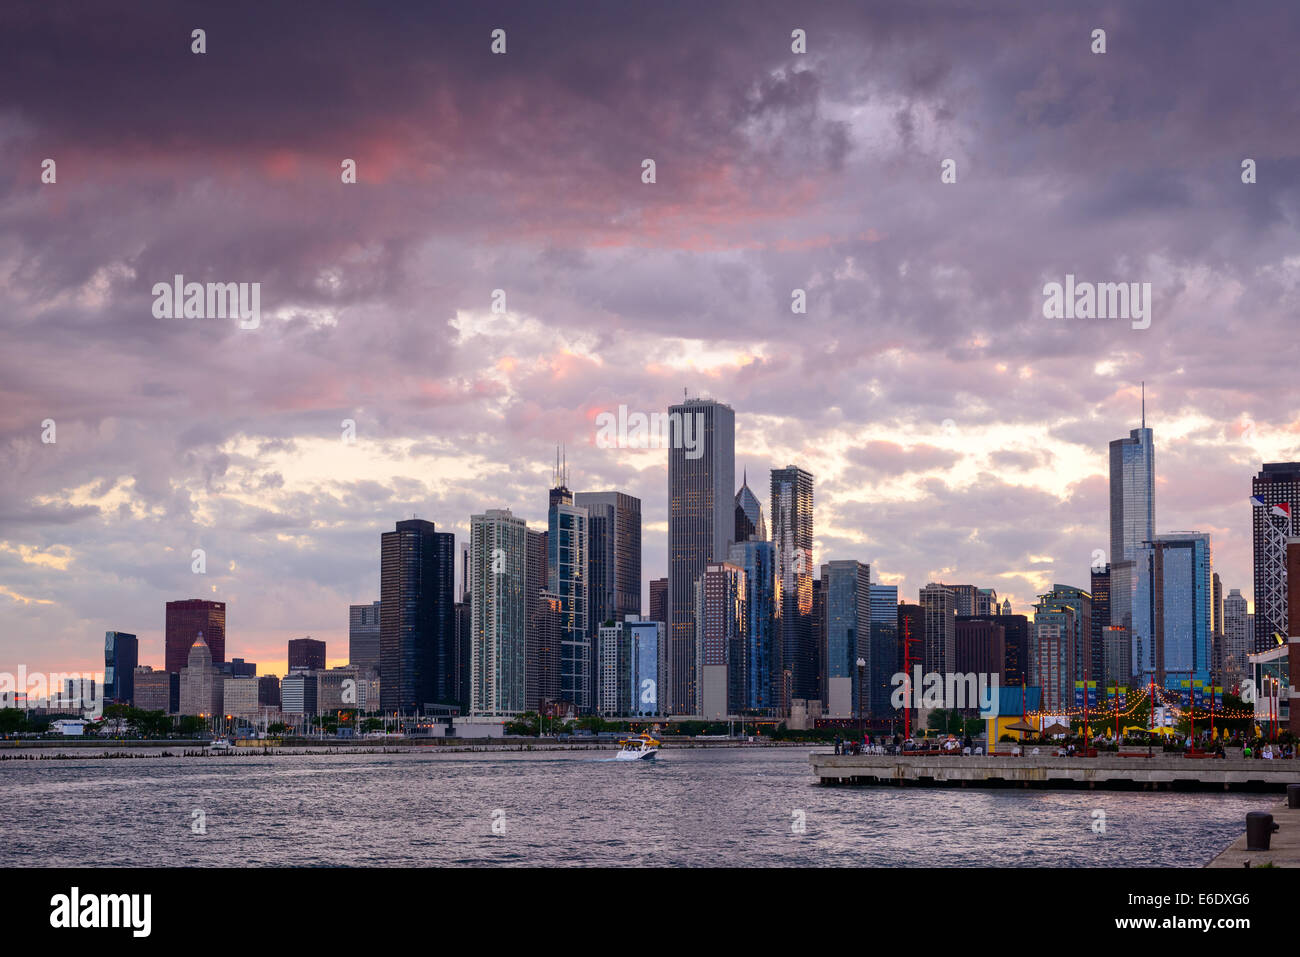 Photograph of the Chicago skyline under a dramatic sunset sky. Stock Photo